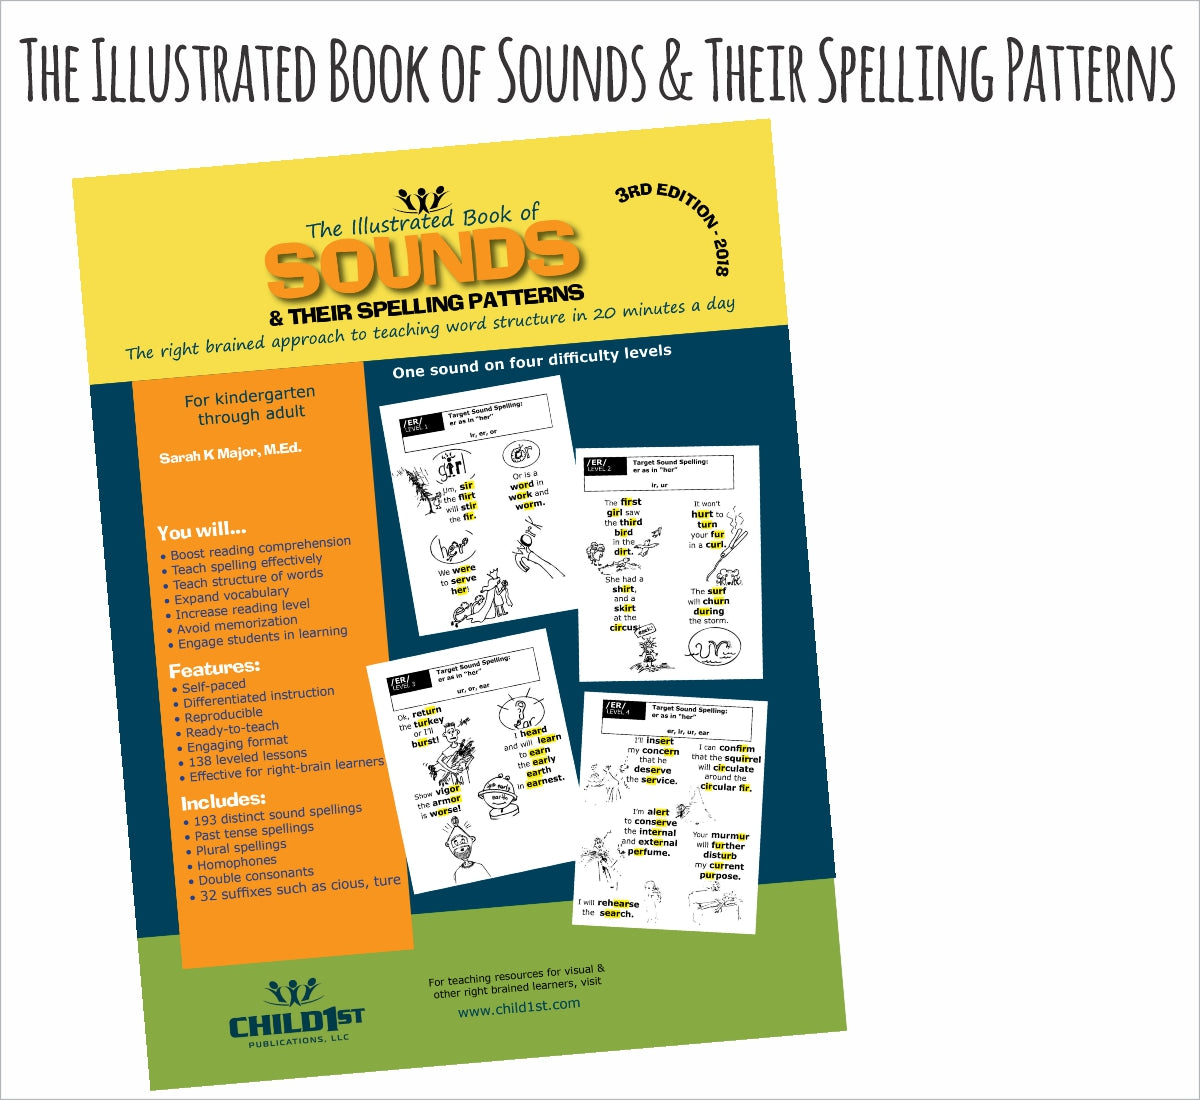 The Illustrated Book of Sounds & Their Spelling Patterns